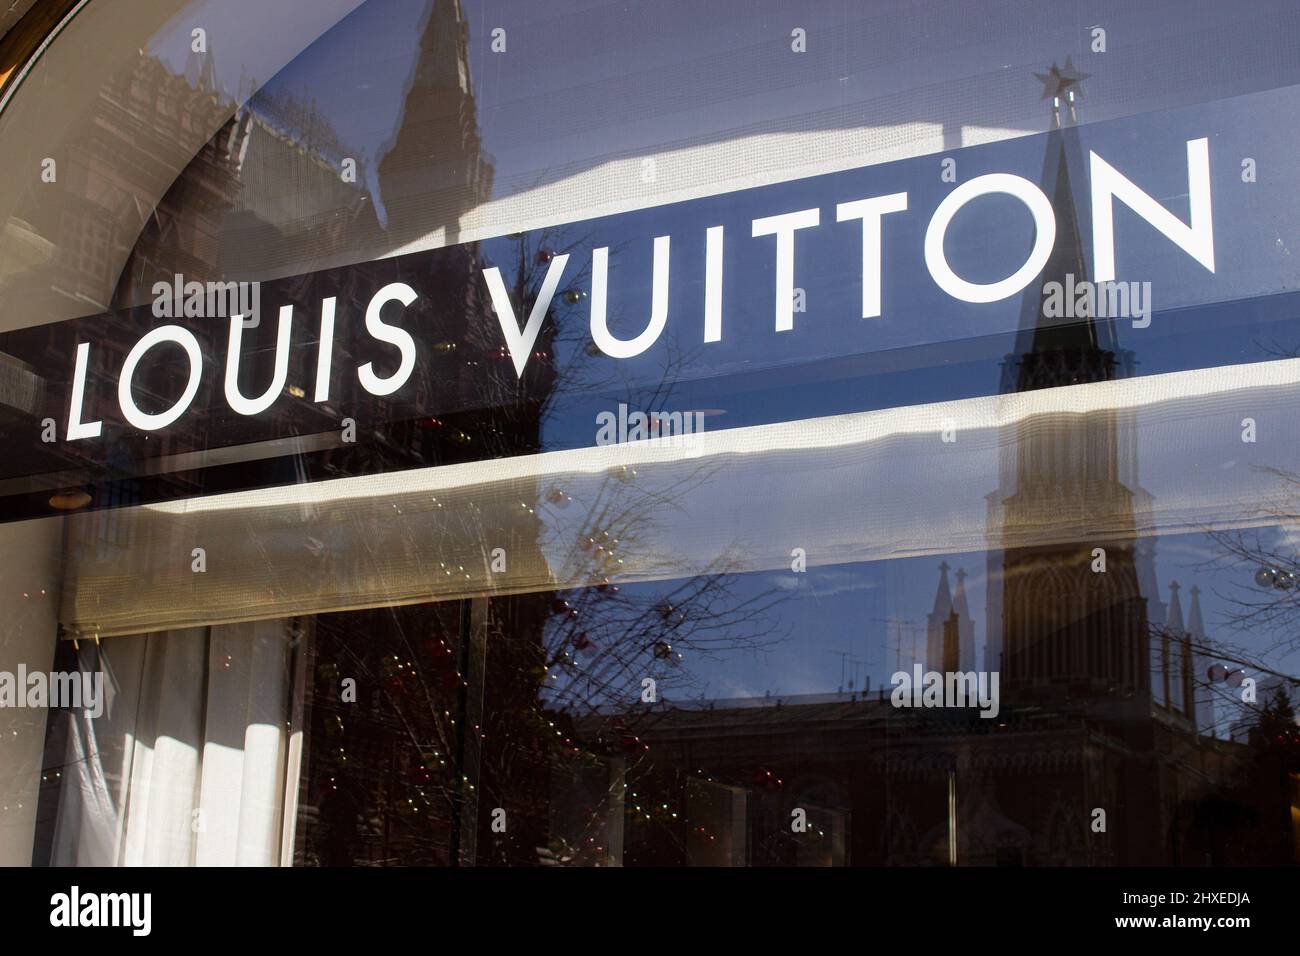 Louis Vuitton opening date announced